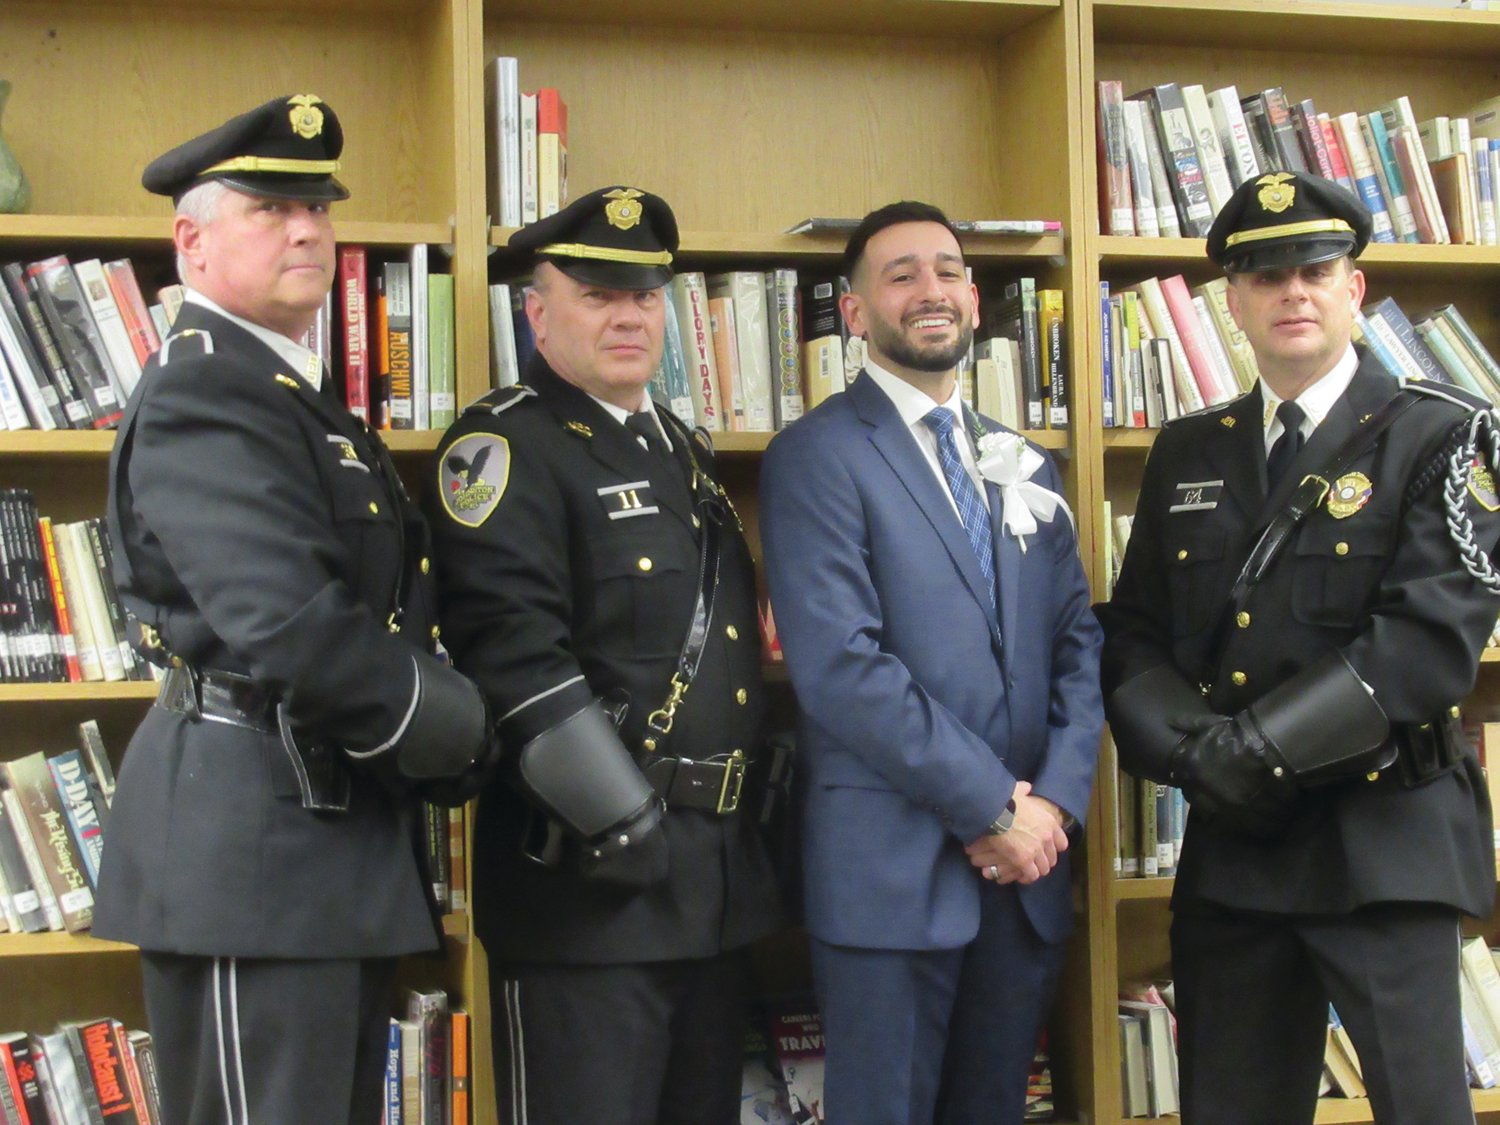 GRAND GUARD: Mayor Joseph Polisena Jr. is joined by the Johnston Police Color Guard that added color and pageantry to Monday’s inauguration. The officers are Detective David Slinko, Lt. Steve Guilmette and Patrolman Charles Psilopoulos.